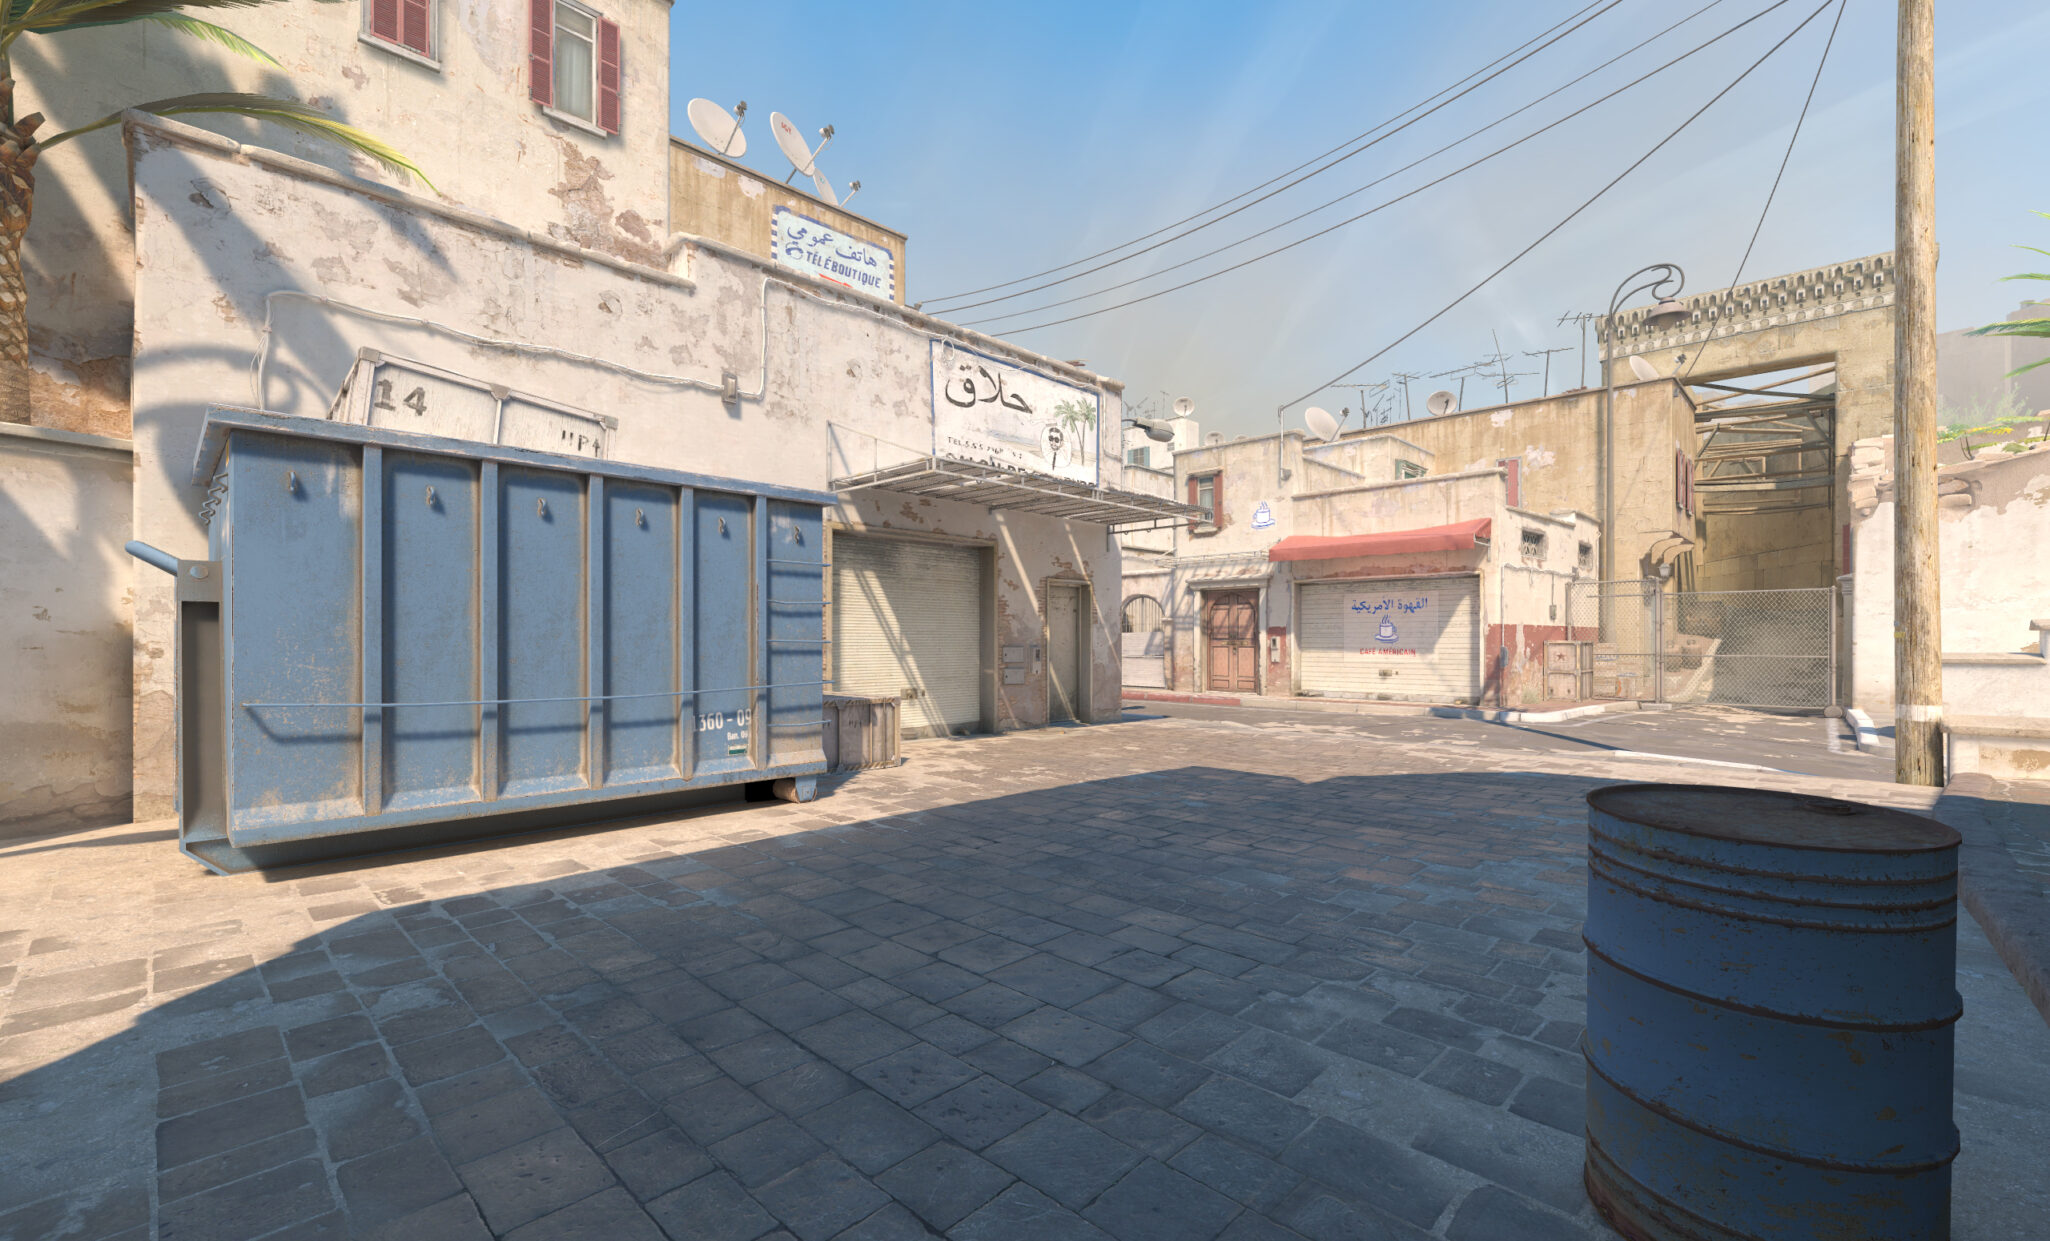 Counter-Strike 2 launches, replaces CS:GO on Steam - Polygon